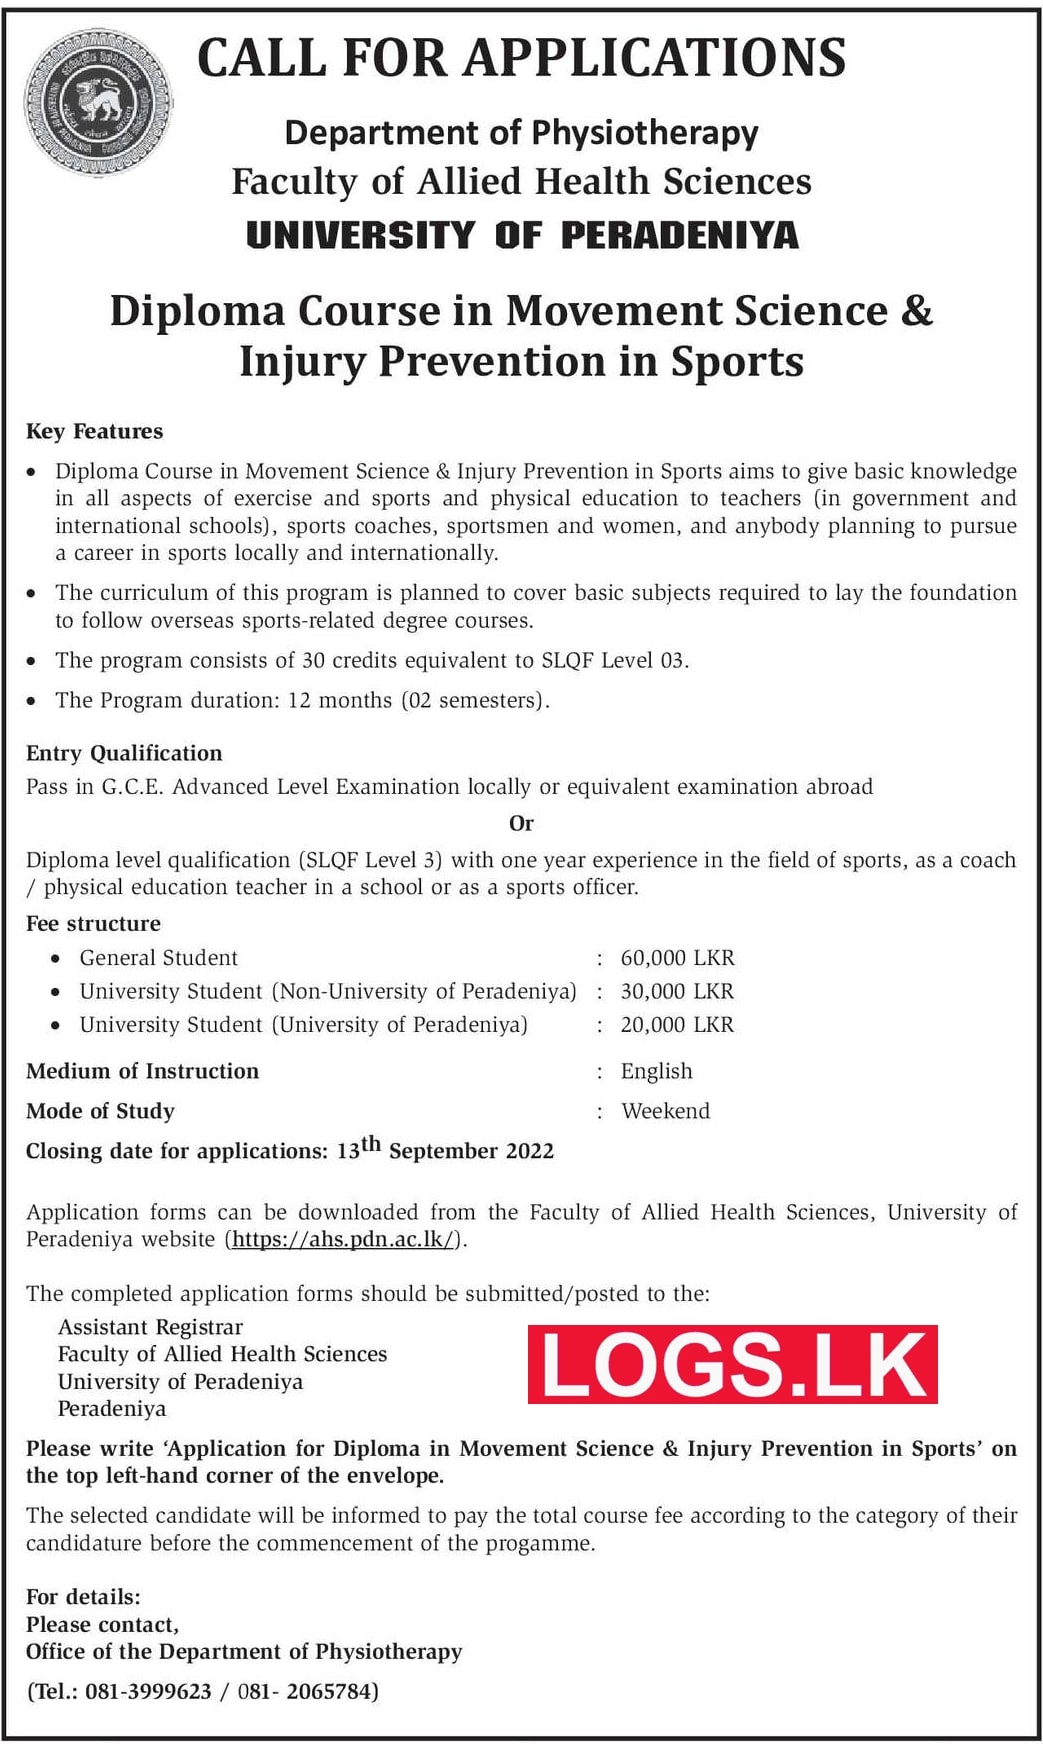 Diploma Course in Movement Science & Injury Prevention in Sports - University of Peradeniya